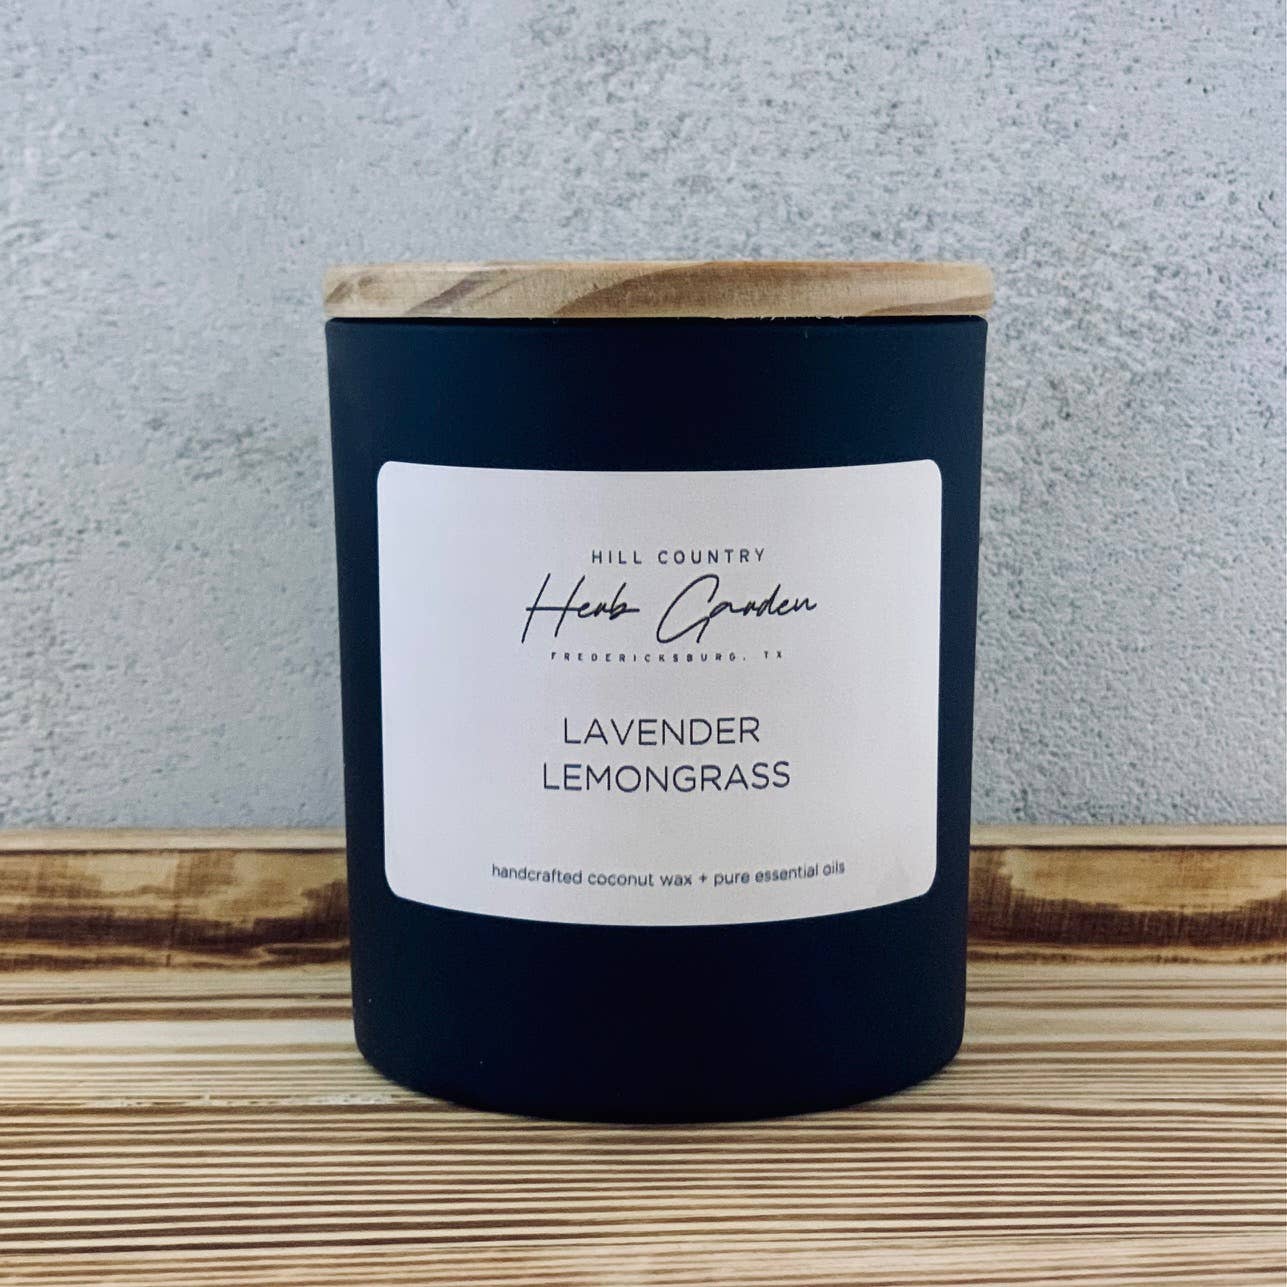 Hill Country Herb Garden - Lavender Lemongrass Coconut Wax + Essential Oil Candle